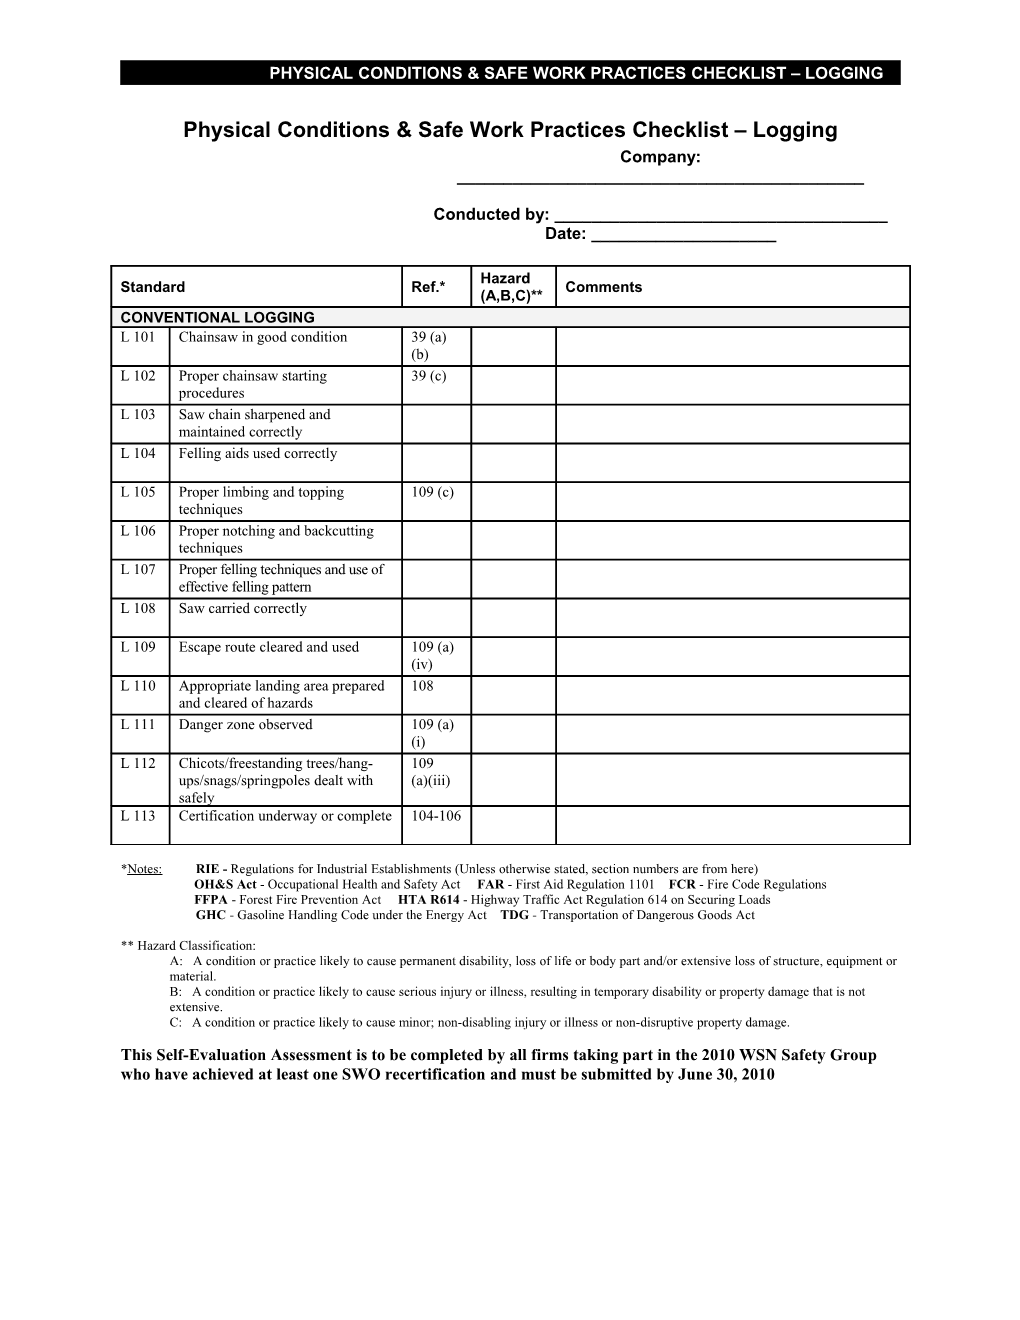 Physical Conditions & Safe Work Practices Checklist Logging